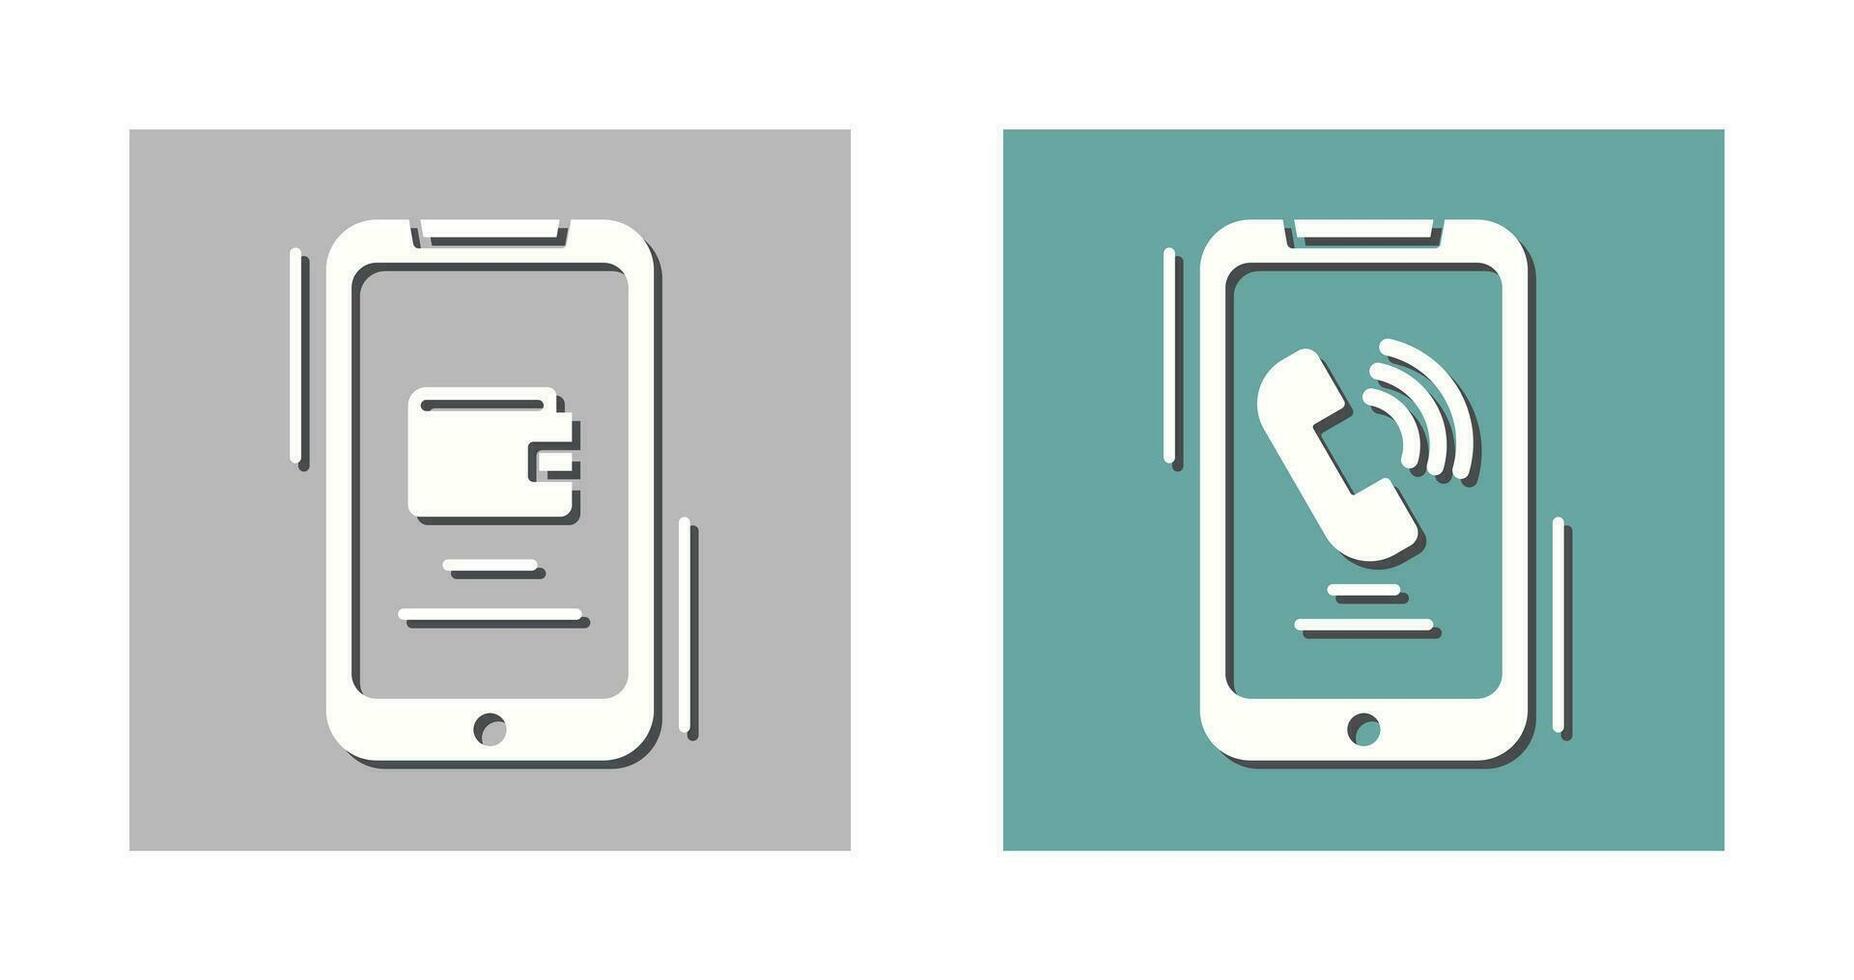 E wallet and Incoming Call Icon vector